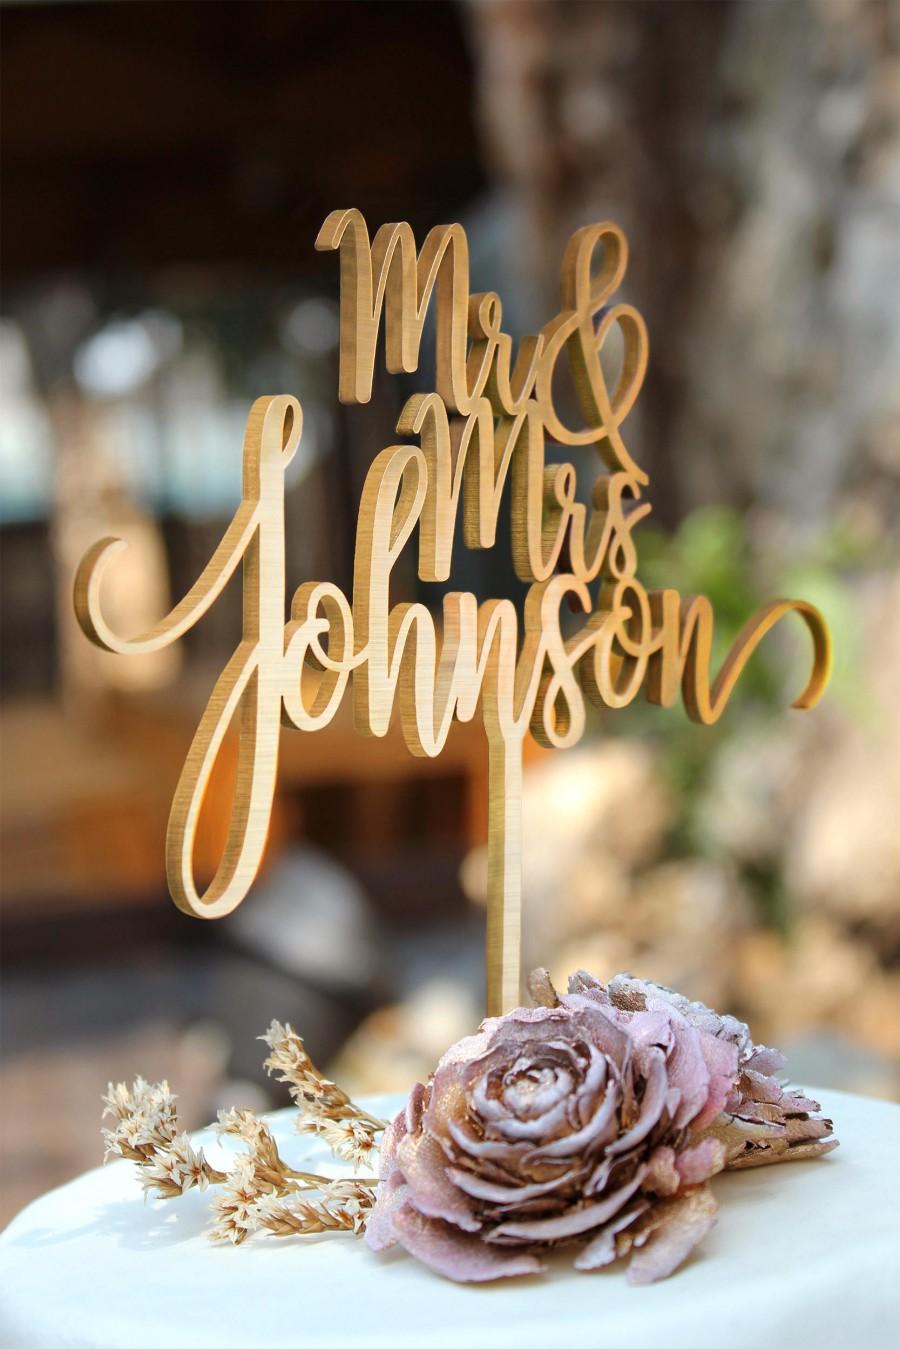 Mariage - Personalized Cake Topper for Wedding, Custom Personalized Wedding Cake Topper, Customized Wedding Cake Topper, Mr and Mrs Cake Topper 29